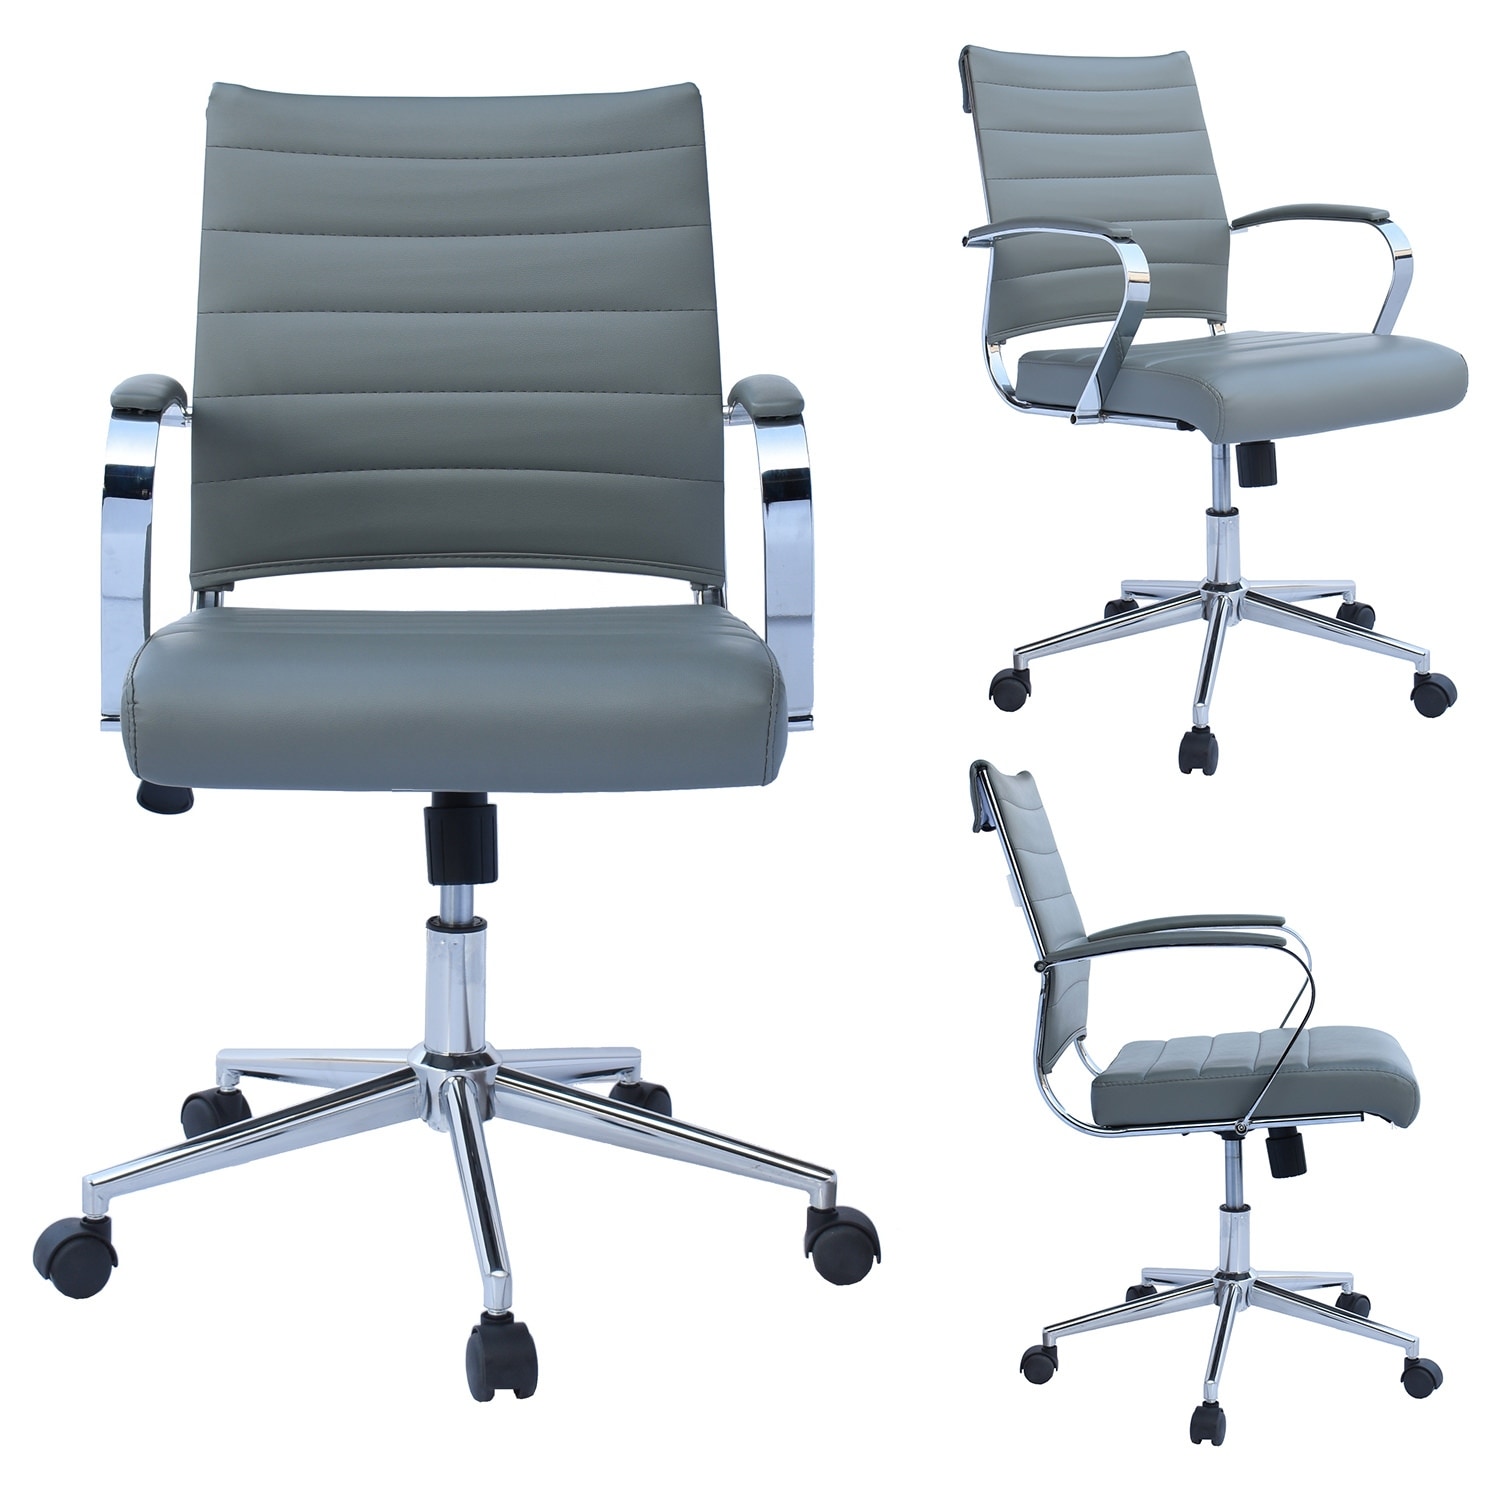 https://ak1.ostkcdn.com/images/products/is/images/direct/3cf354c530ac0545a4b6f10ddf402aa008520b44/Modern-Office-Chair%2C-Executive-Mid-Back-Conference-Room-Chair-in-PU-Leather-with-Wheels-and-Arms.jpg